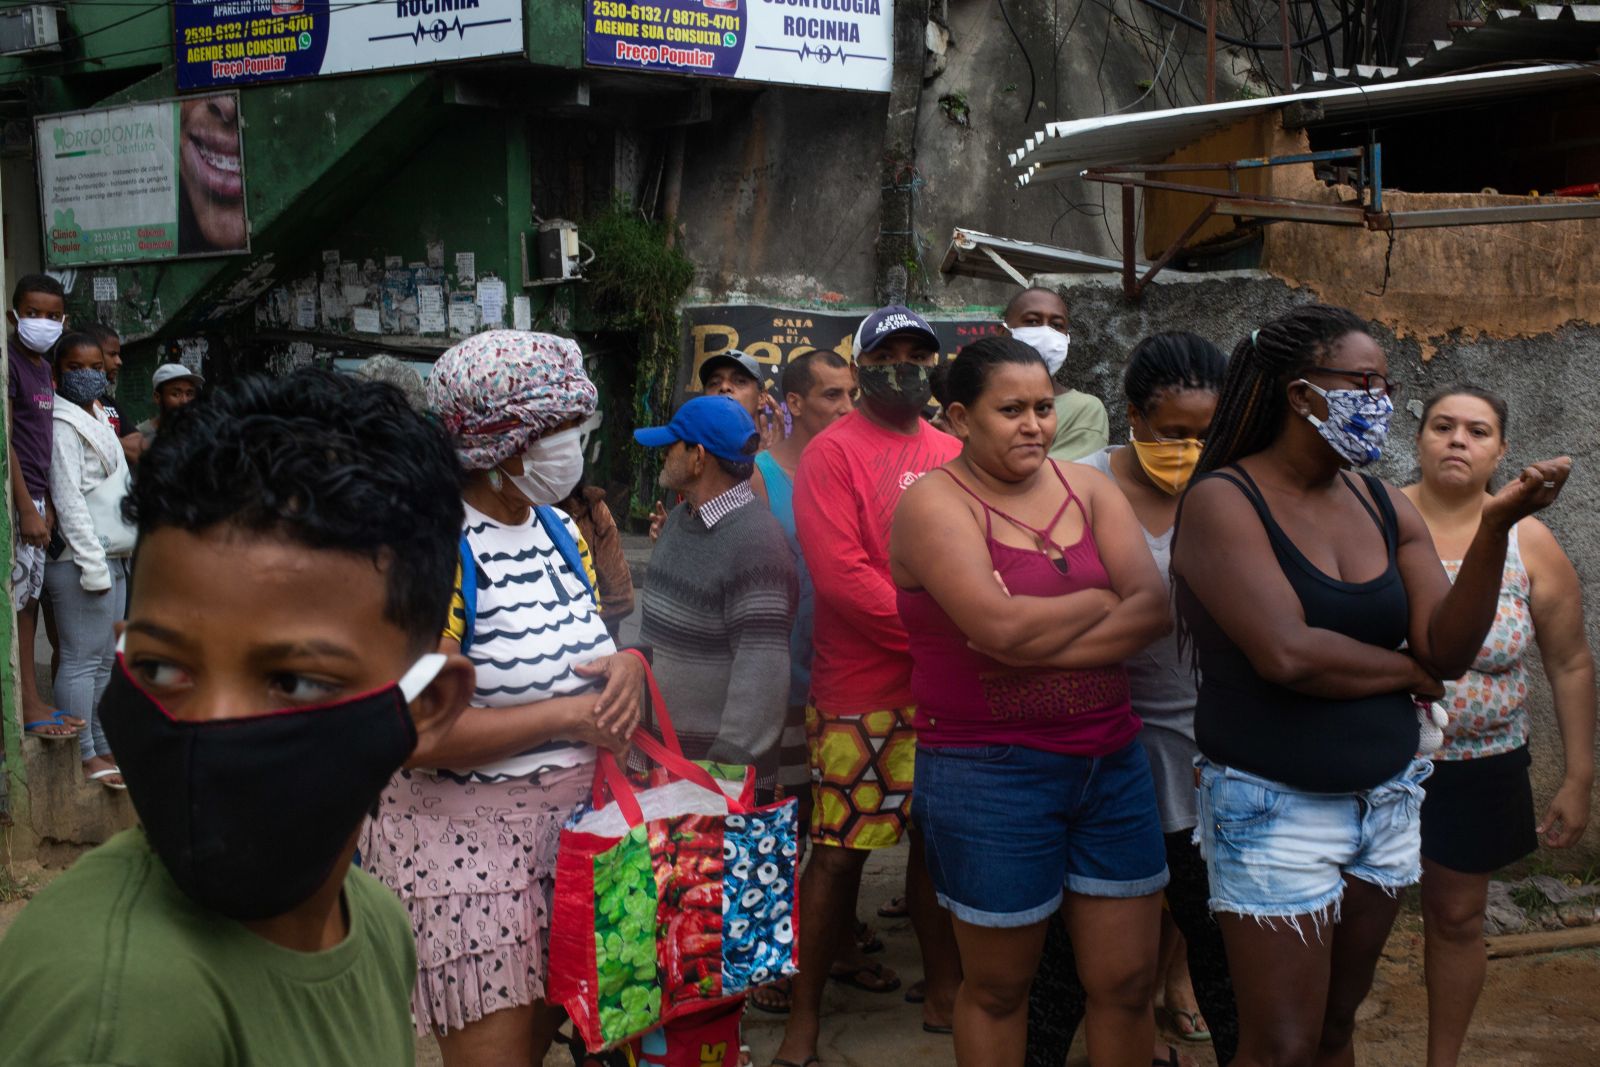 Not much space for social distancing: favela residents waiting for food supplied by a non-governmental activist.